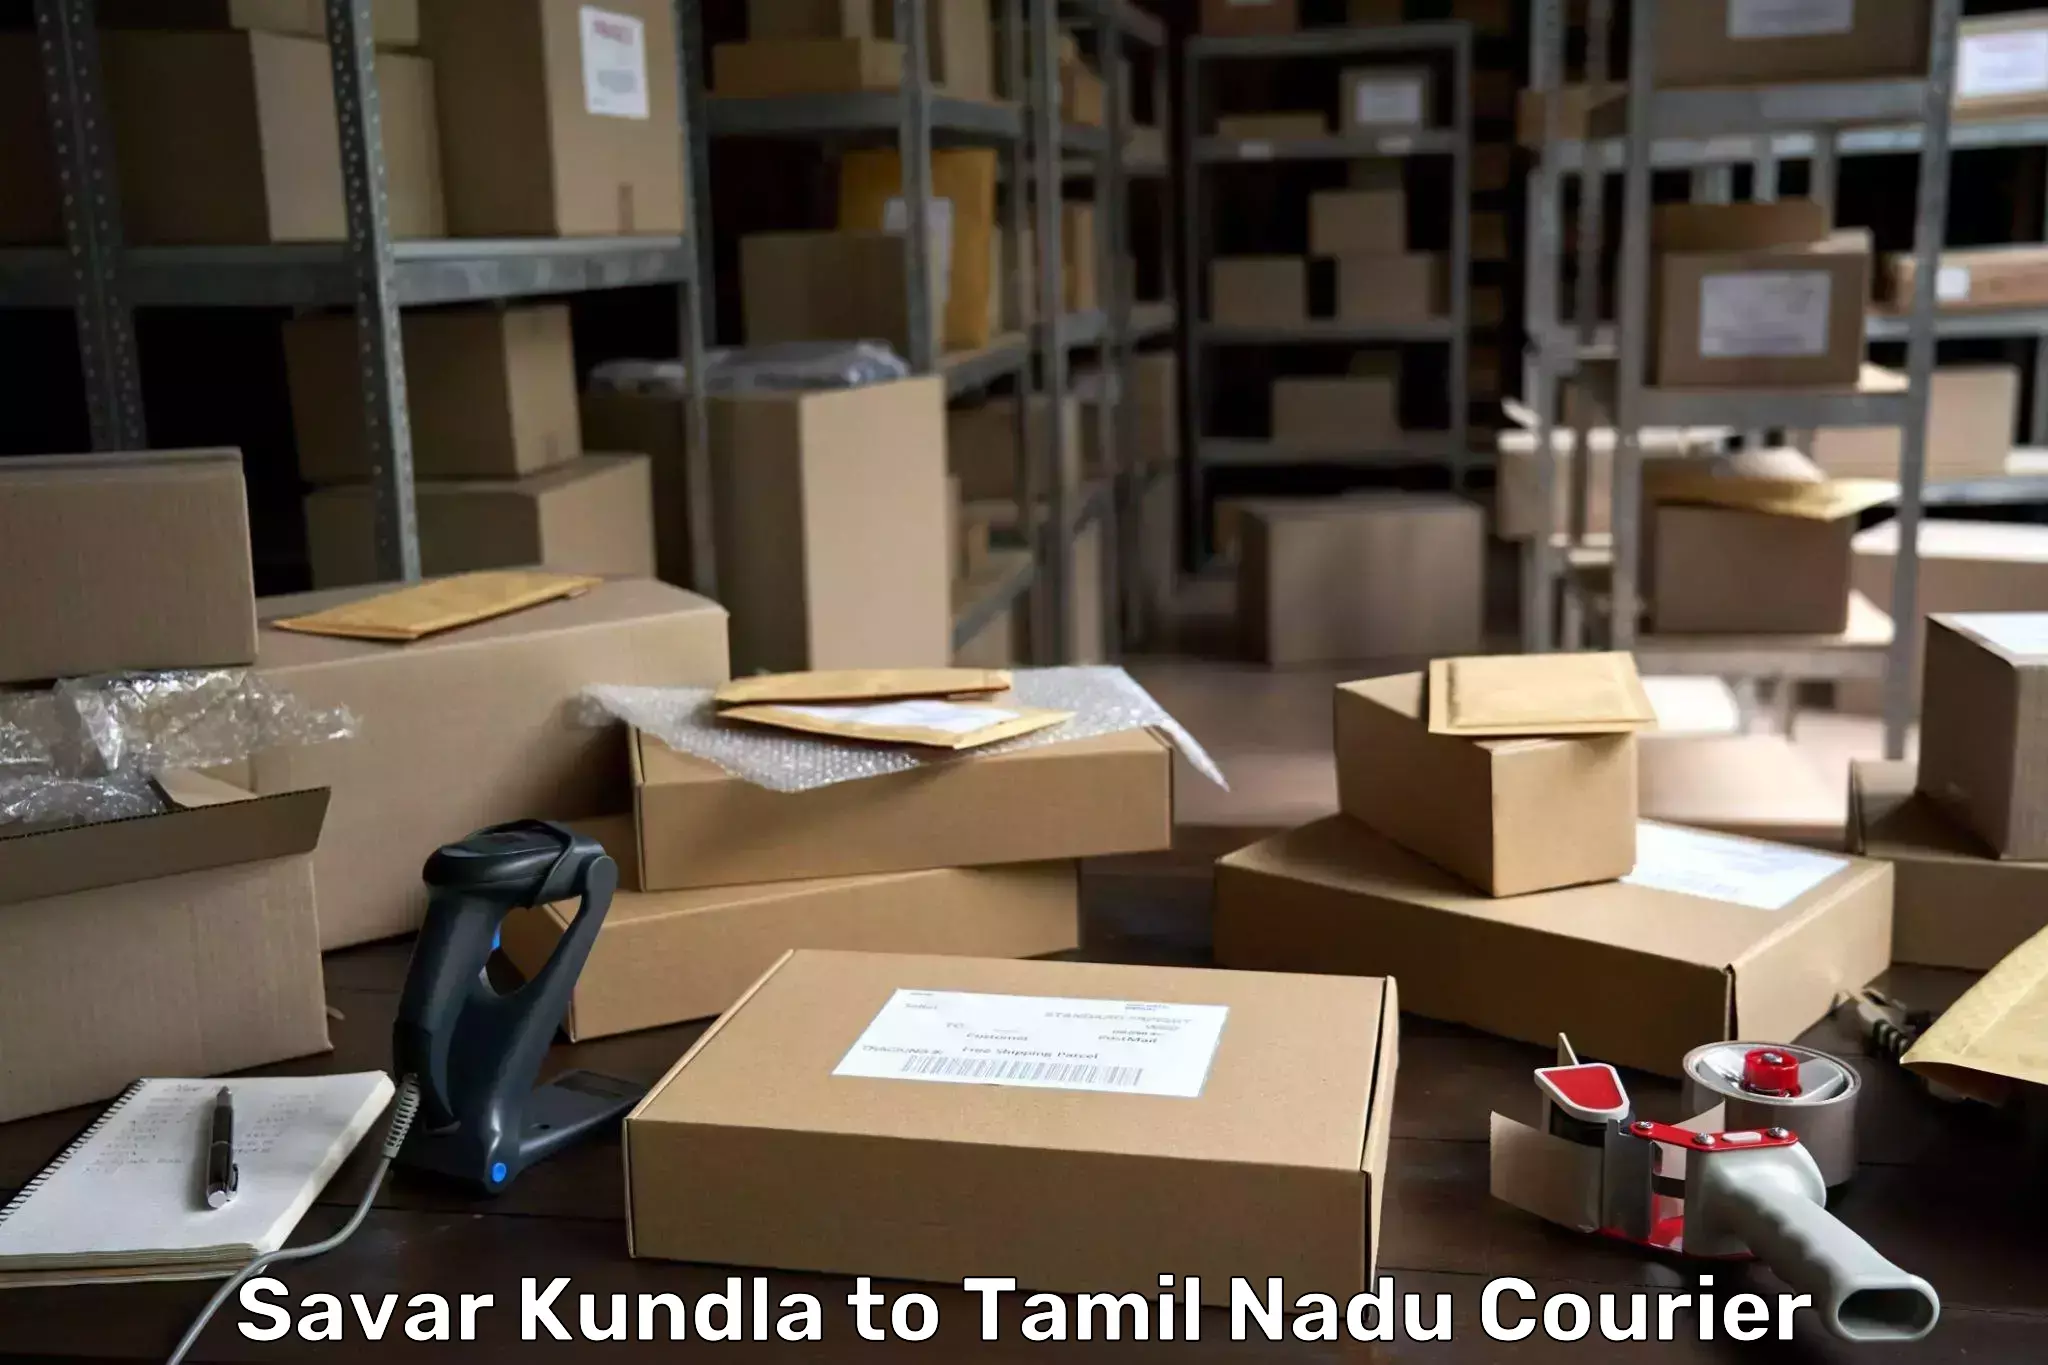 Full-service courier options Savar Kundla to Vellore